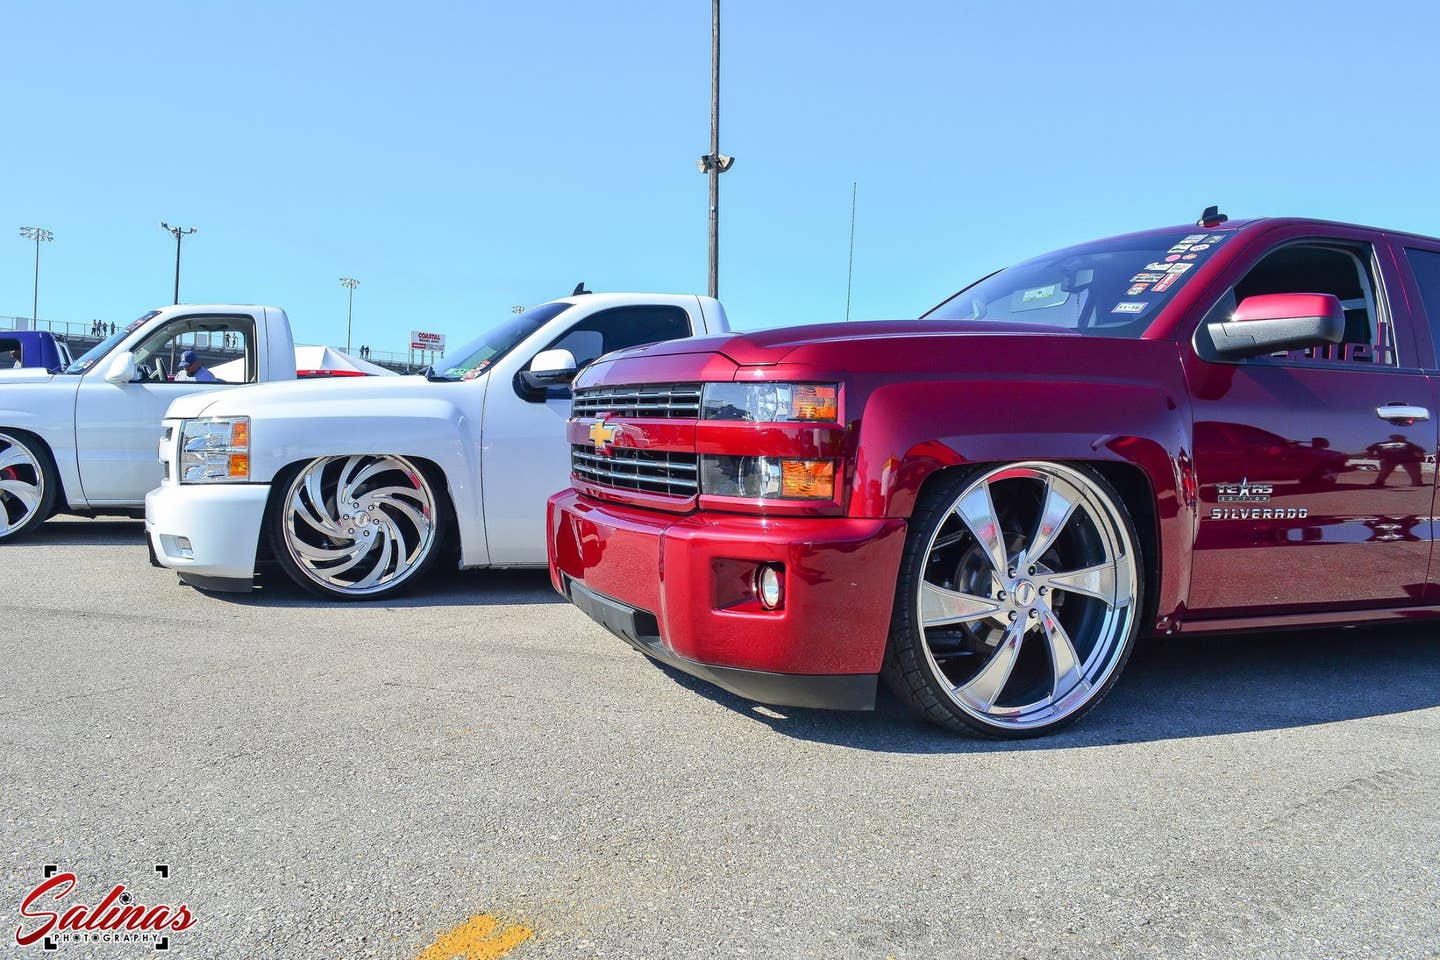 Texas Truck Shows Are All About The Billet